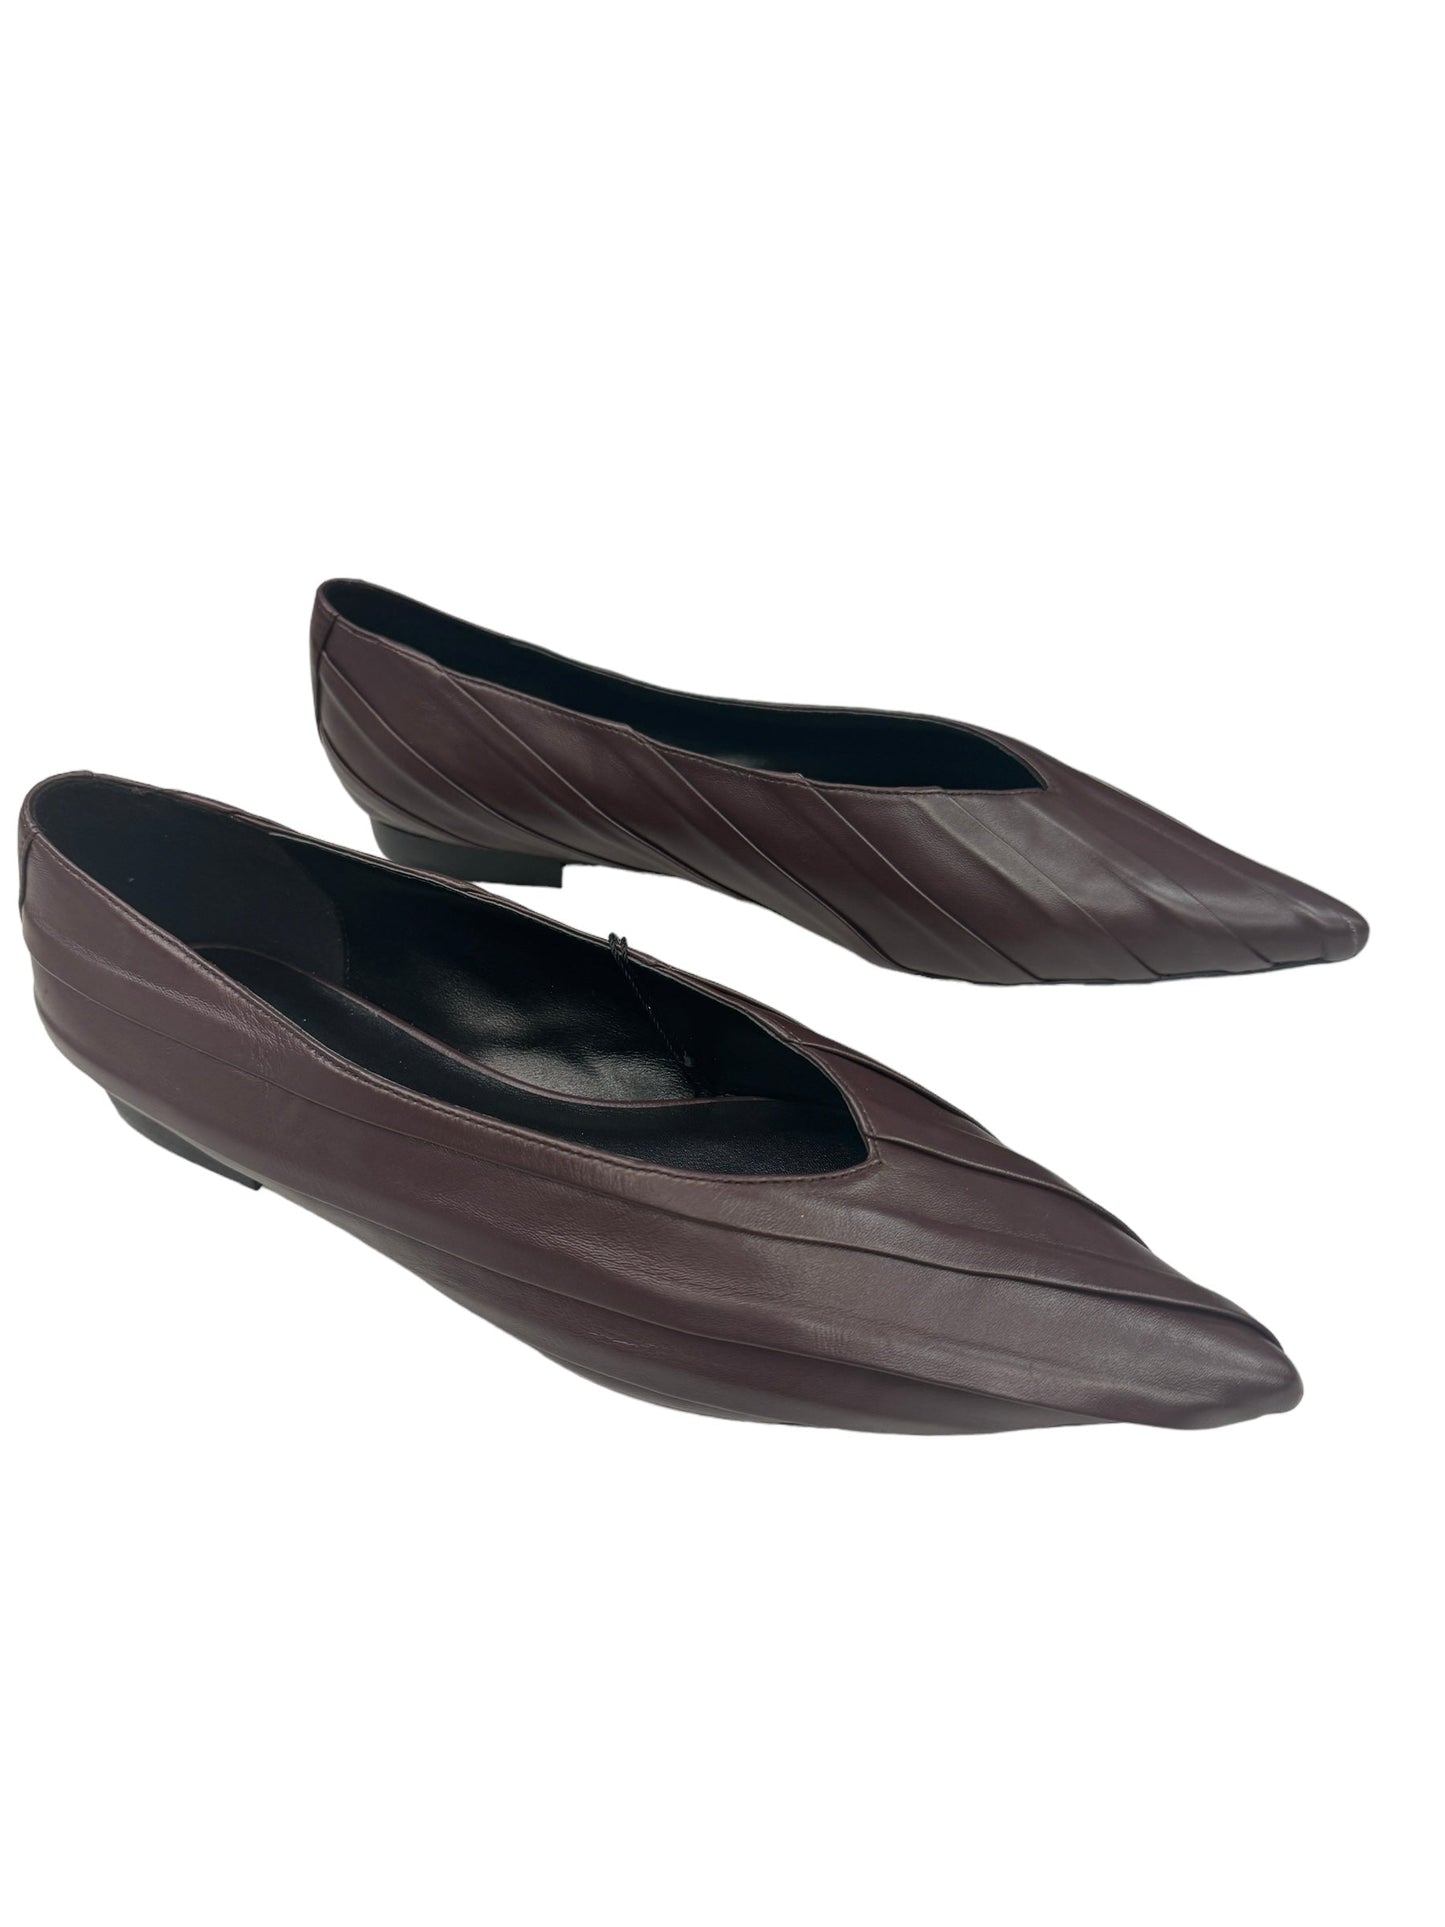 Shoes Flats Other By Aldo  Size: 9.5